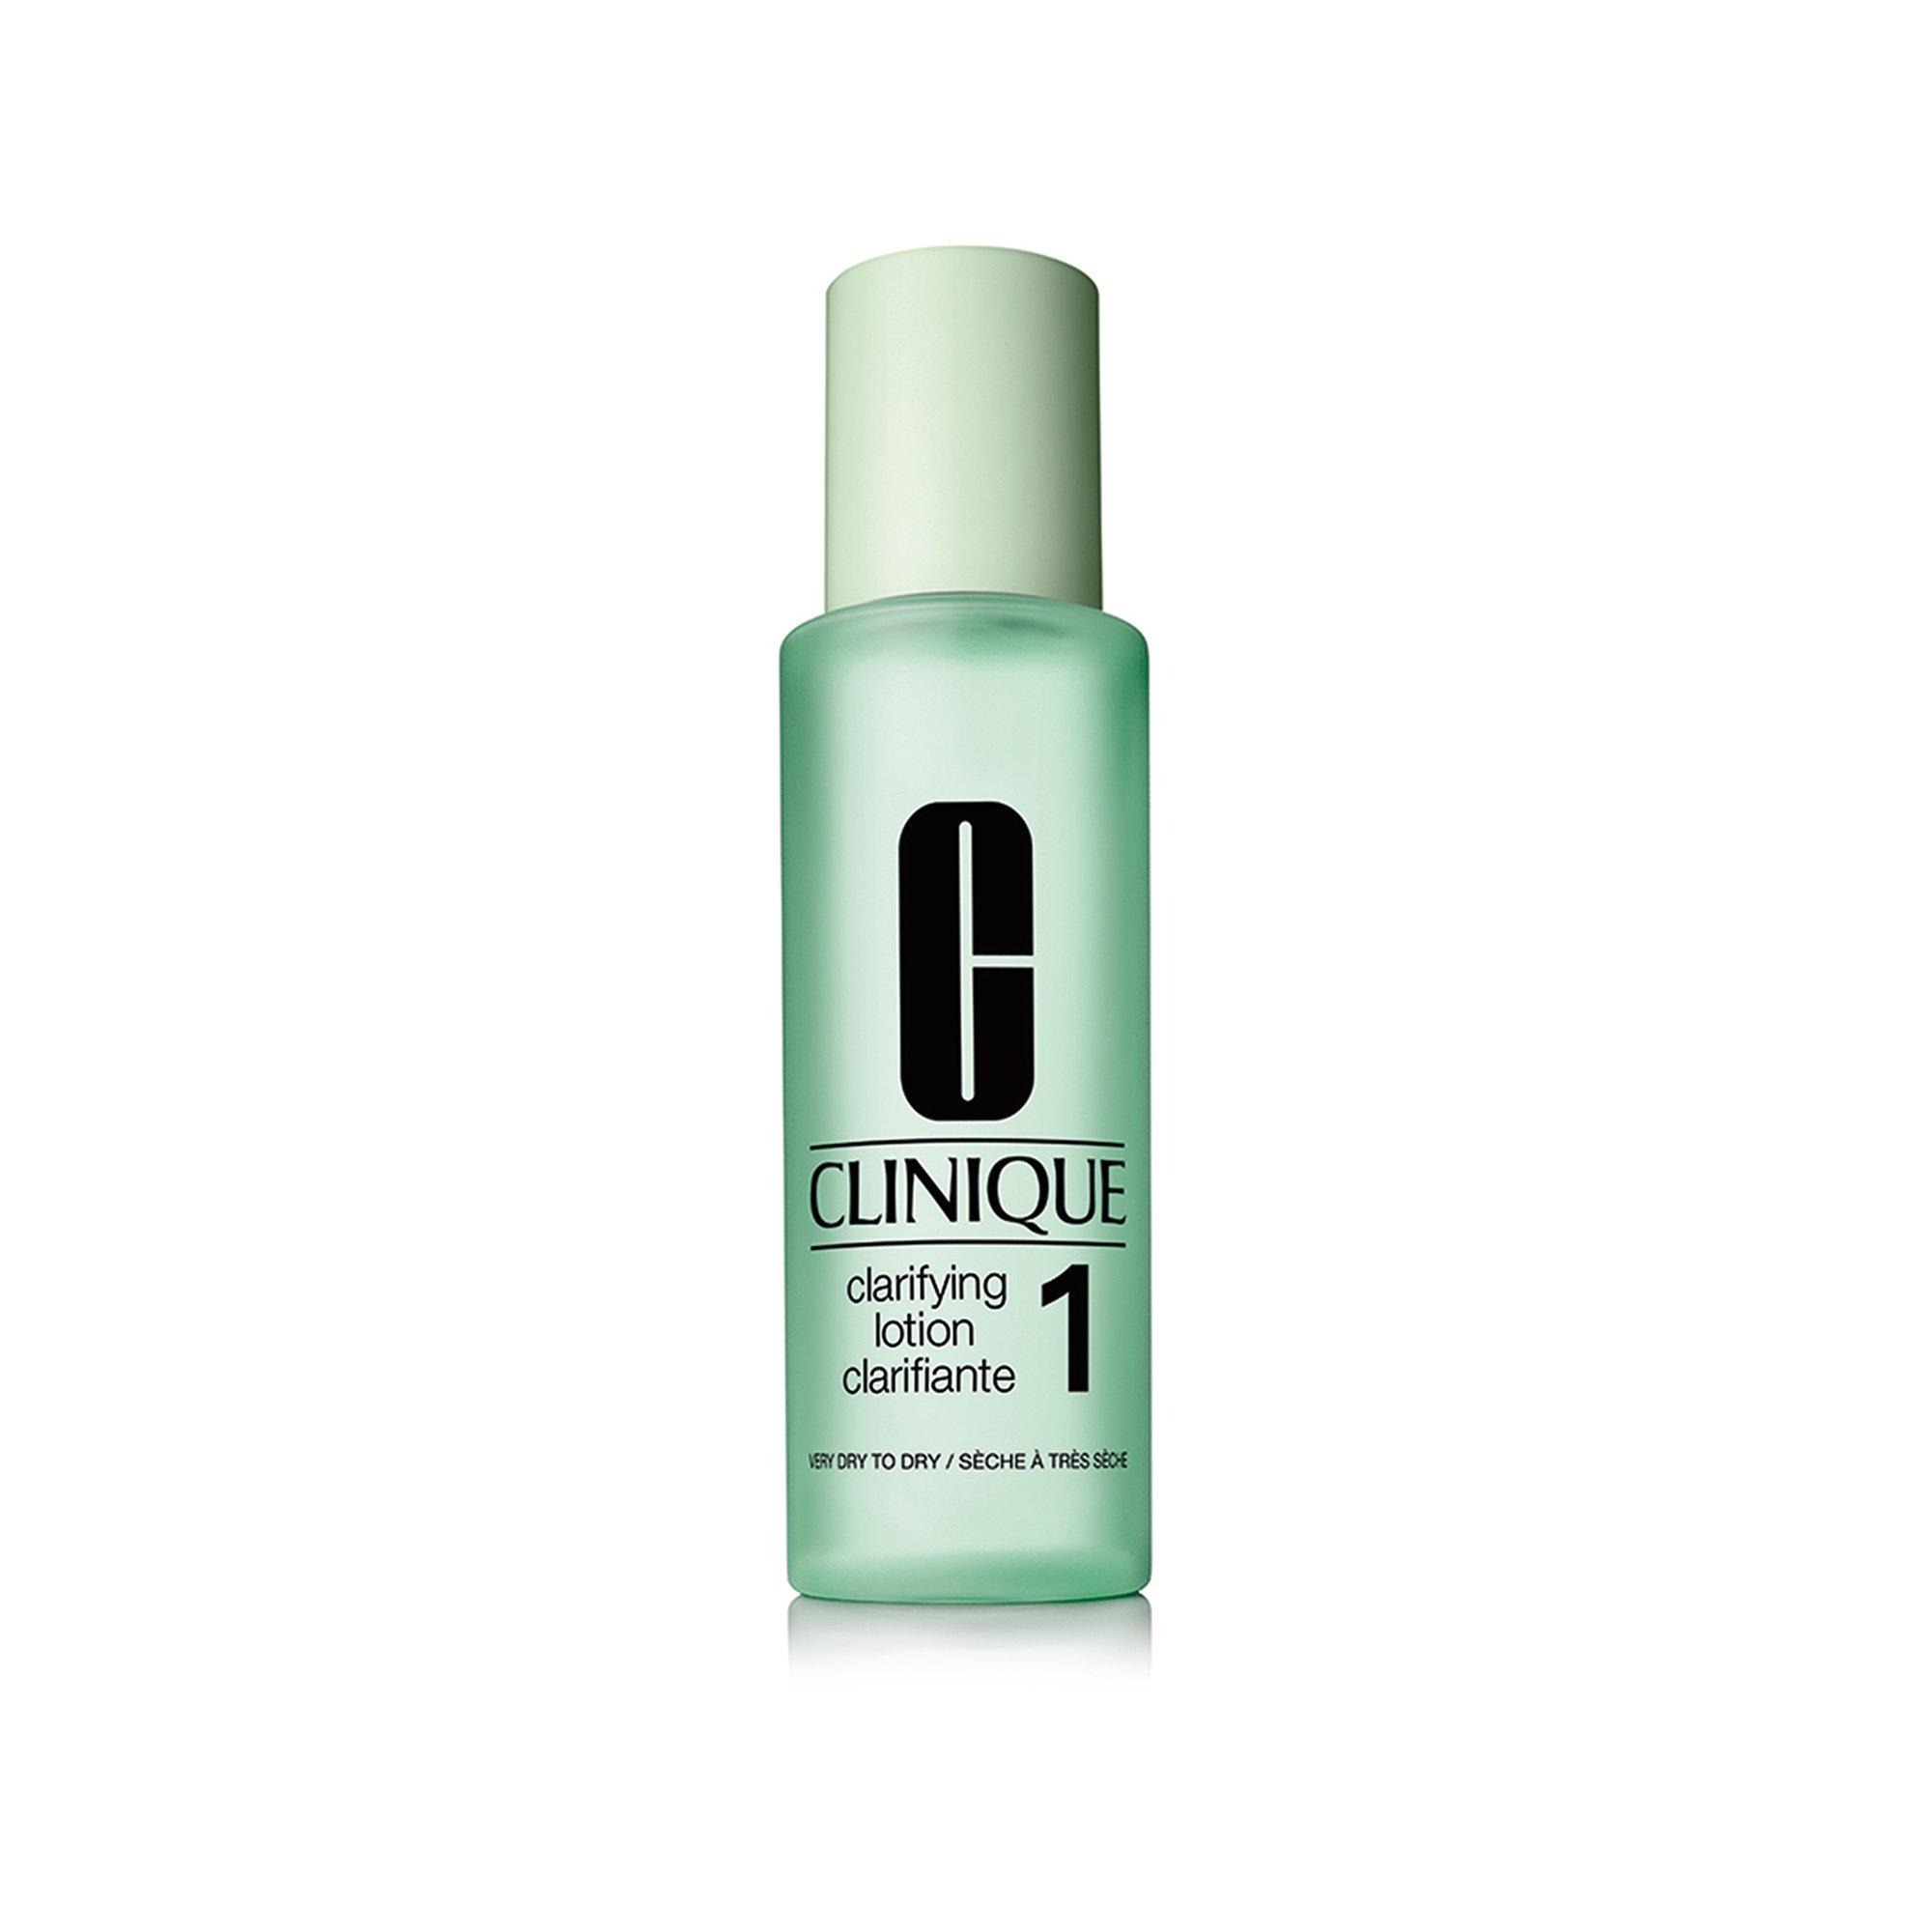 Image of CLINIQUE Clarifying Lotion 1 - 200ml